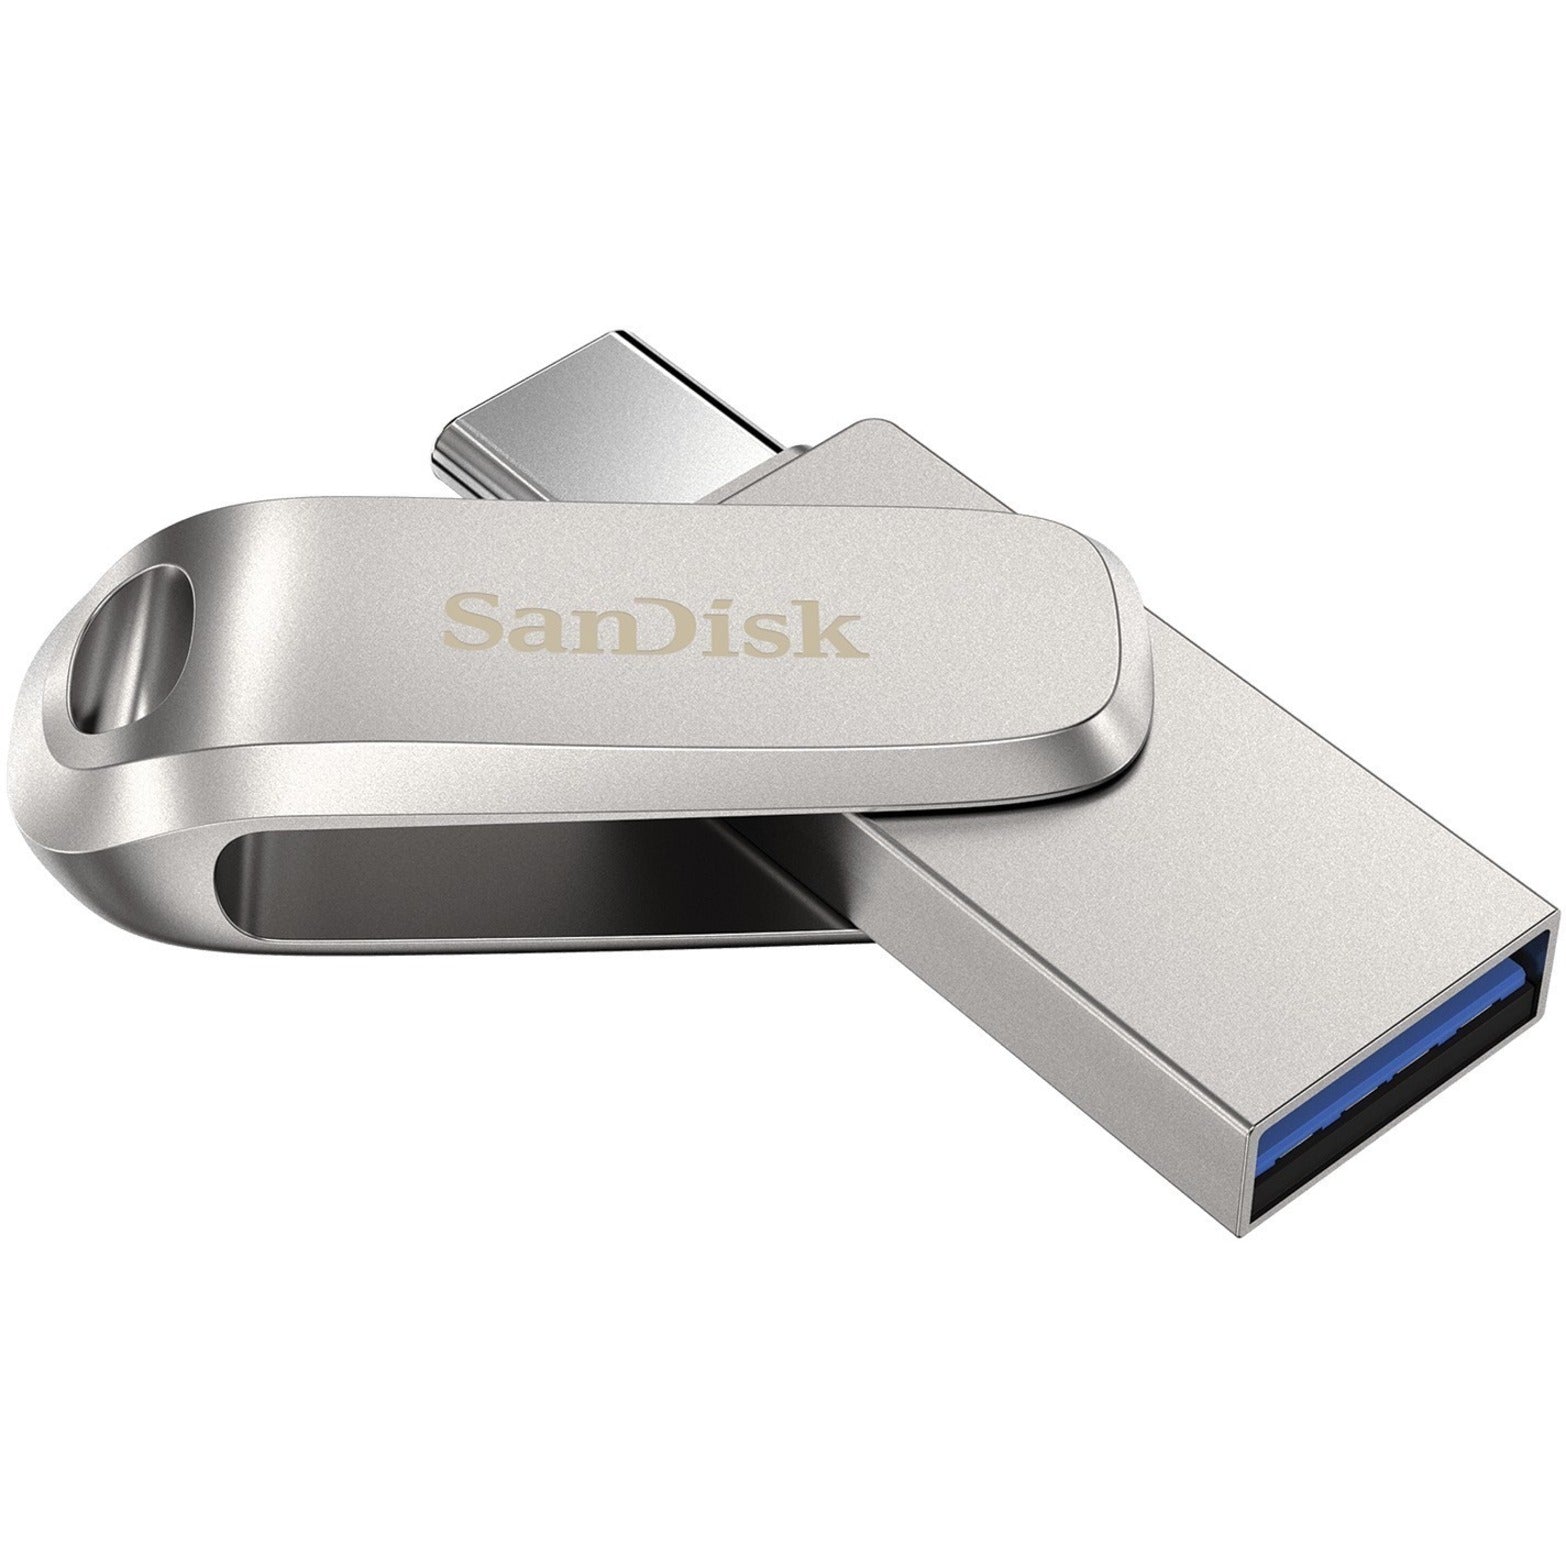 SanDisk SDDDC4-128G-A46 Ultra Dual Drive Luxe USB Type-C - 128GB High-Speed Data Transfer and Storage